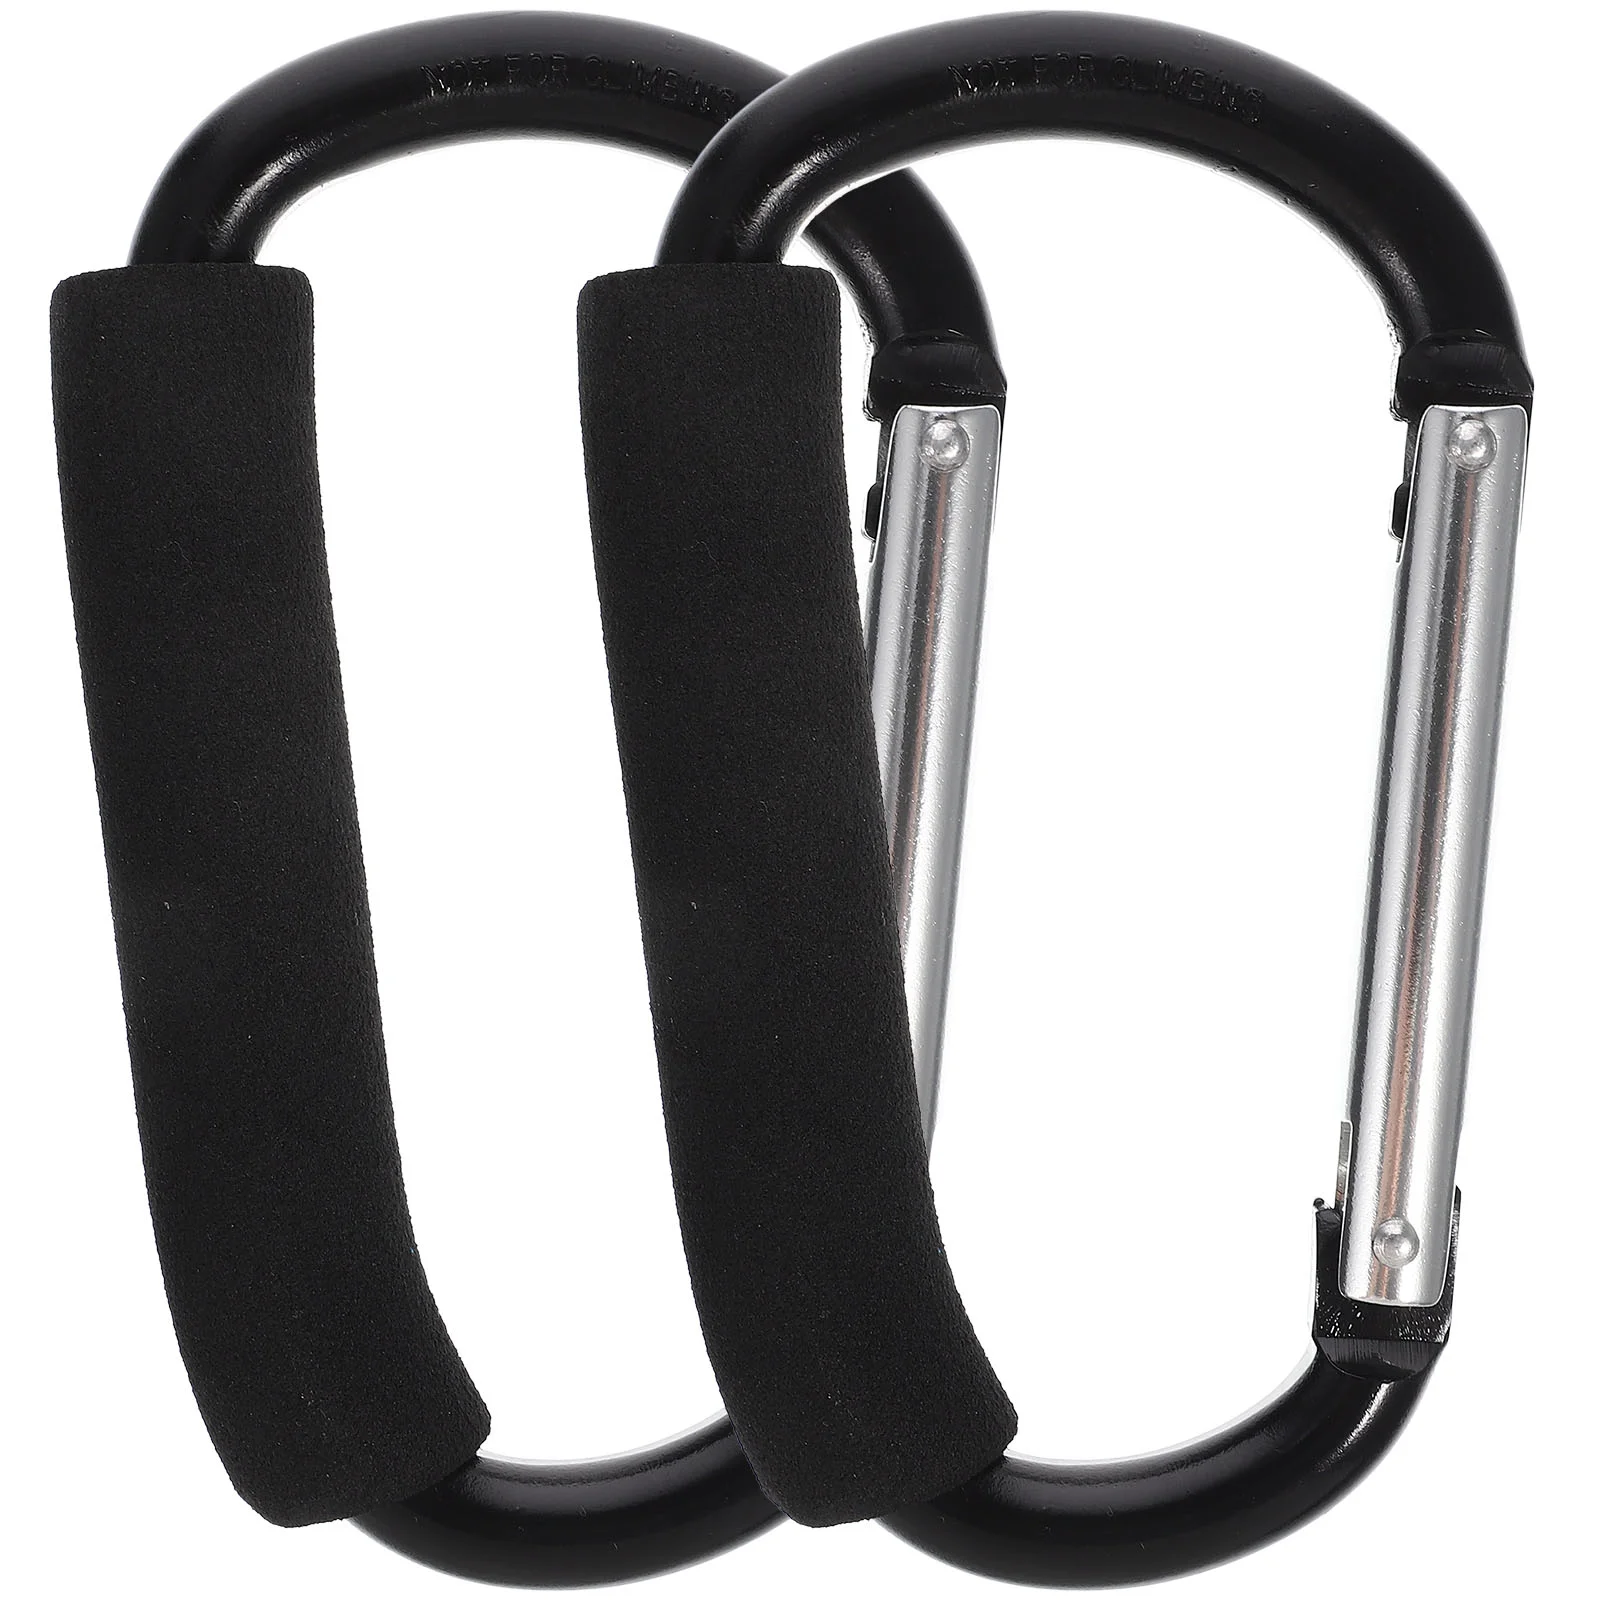 

2 Pcs Heavy Duty Clothes Rack Cart Hook Hooks Multi-function Stroller Big Outdoor Hanger for Large Carabiners Shopping